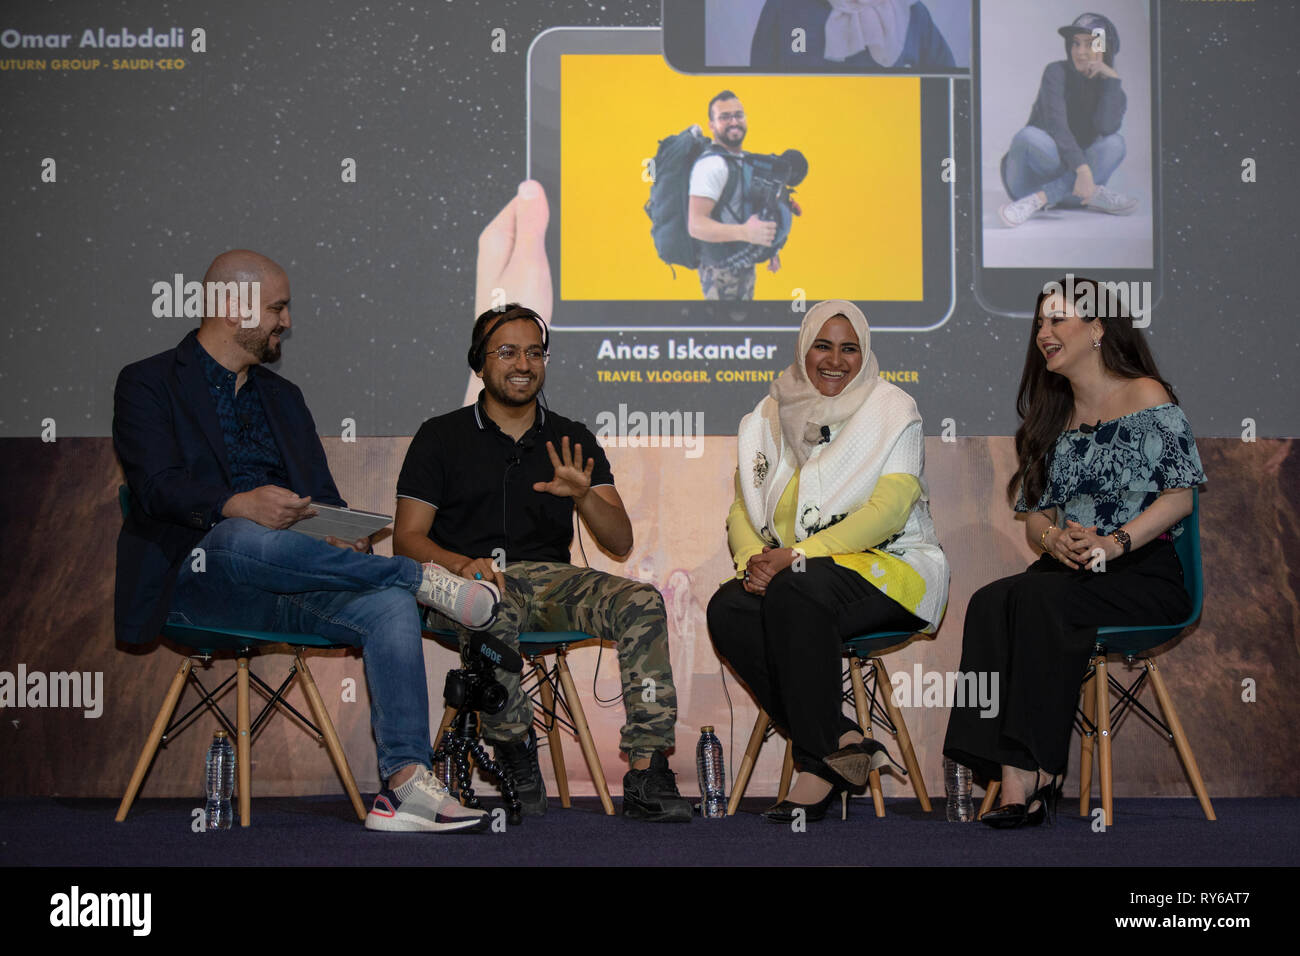 Dubai, United Arab Emirates, 12 March 2019, (from the right) Danyah Shafei, TV Anchor, Content Creator, Influencer, UTURN Entertainment, Hatoon Kadi, Content Creator, Influencer UTURN Entertainment, Anas Iskander, Travel Vlogger, Content Creator, Influencer, UTURN Entertainment  and Omar Al Abdali, Group CEO-Saudi, UTURN Entertainmen at Dubai Lynx - International Festival of Creativity, Â© ifnm / Alamy Live News Stock Photo